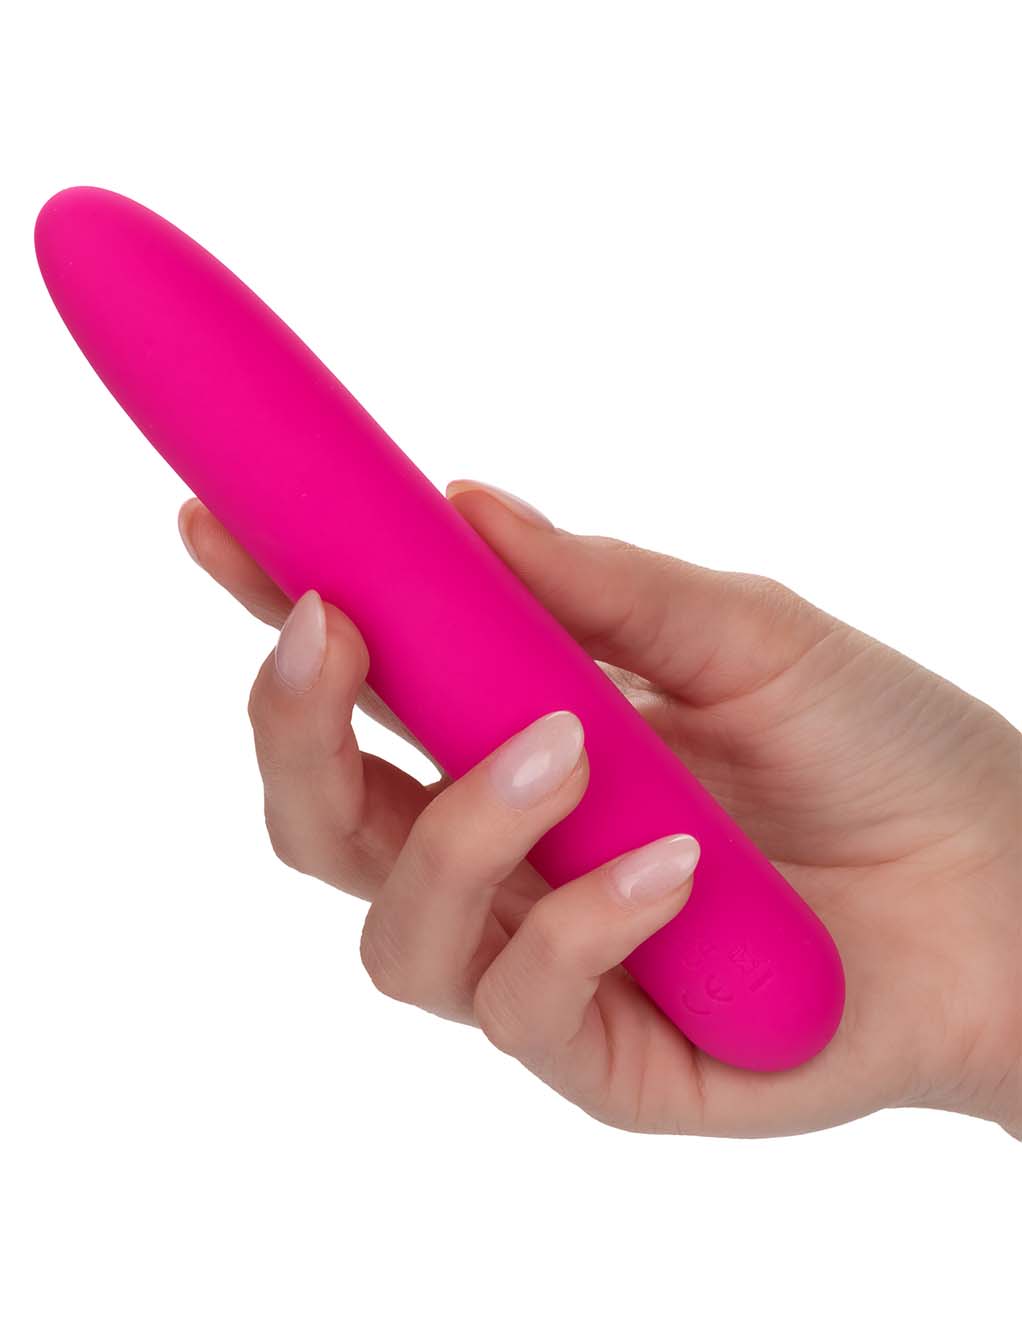 Bliss Liquid Silicone Vibe- In Hand